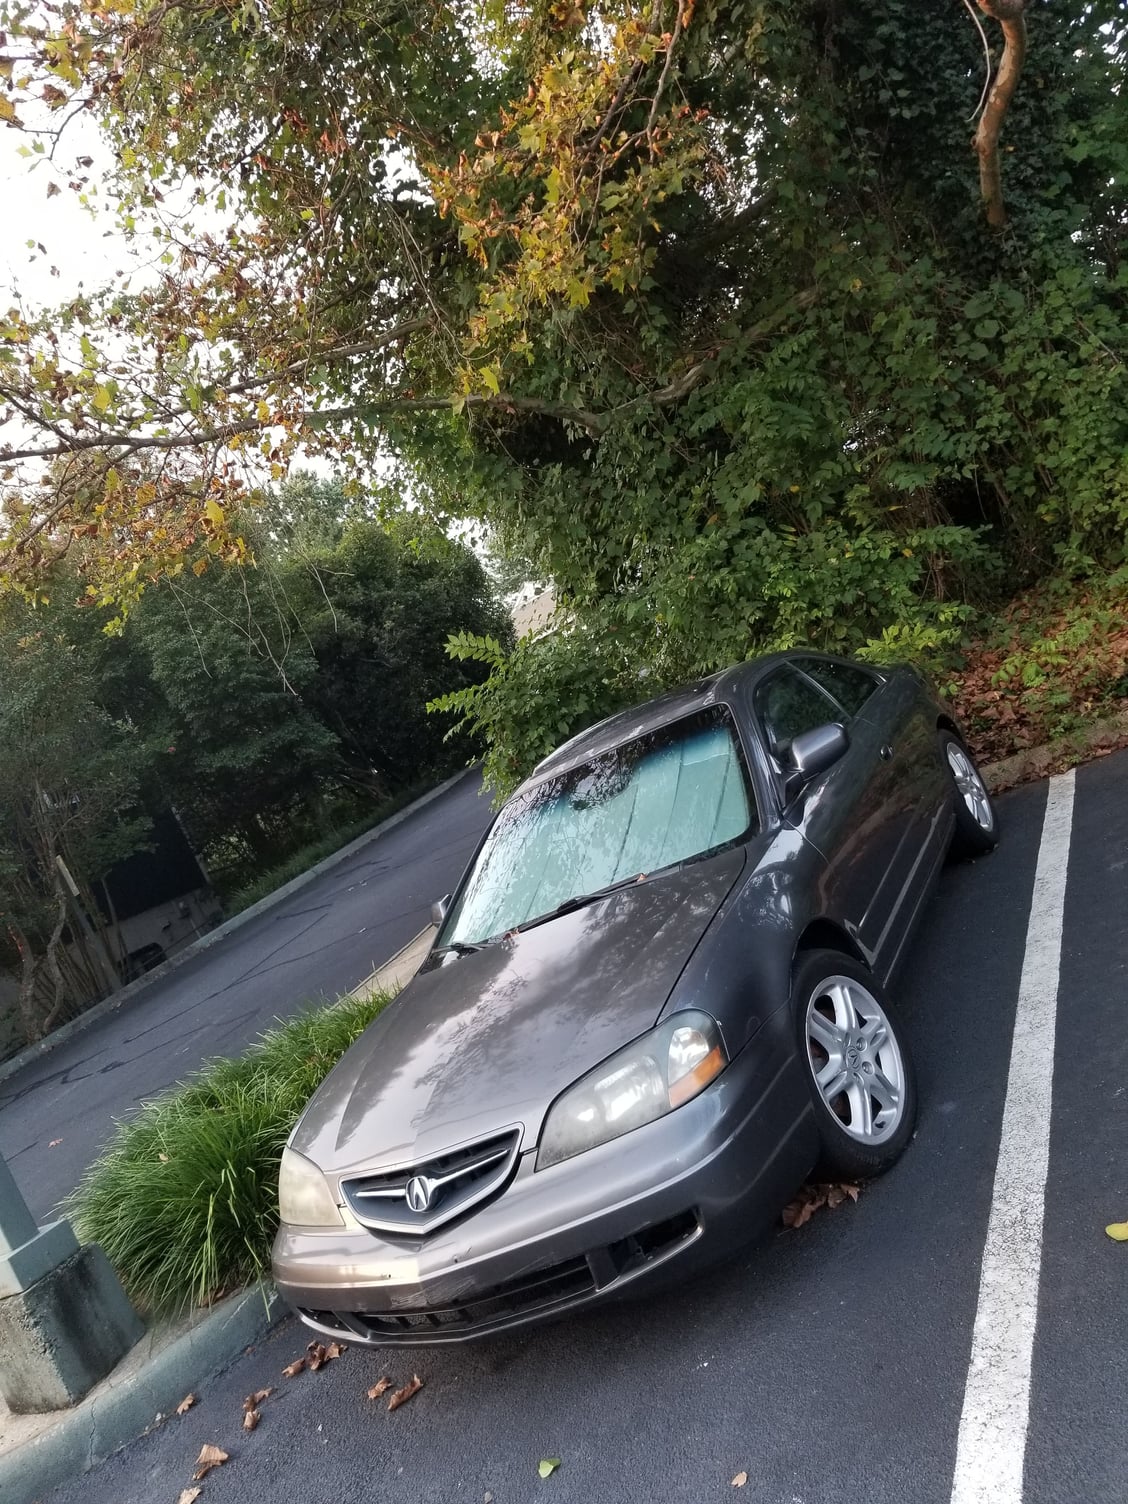 2003 Acura CL - CLOSED: 2003 Acura CL Type S with 6 Speed Transmission - Used - VIN 19UYA41643A009245 - 212,000 Miles - 6 cyl - Manual - Coupe - Gray - Charlottesville, VA 22902, United States